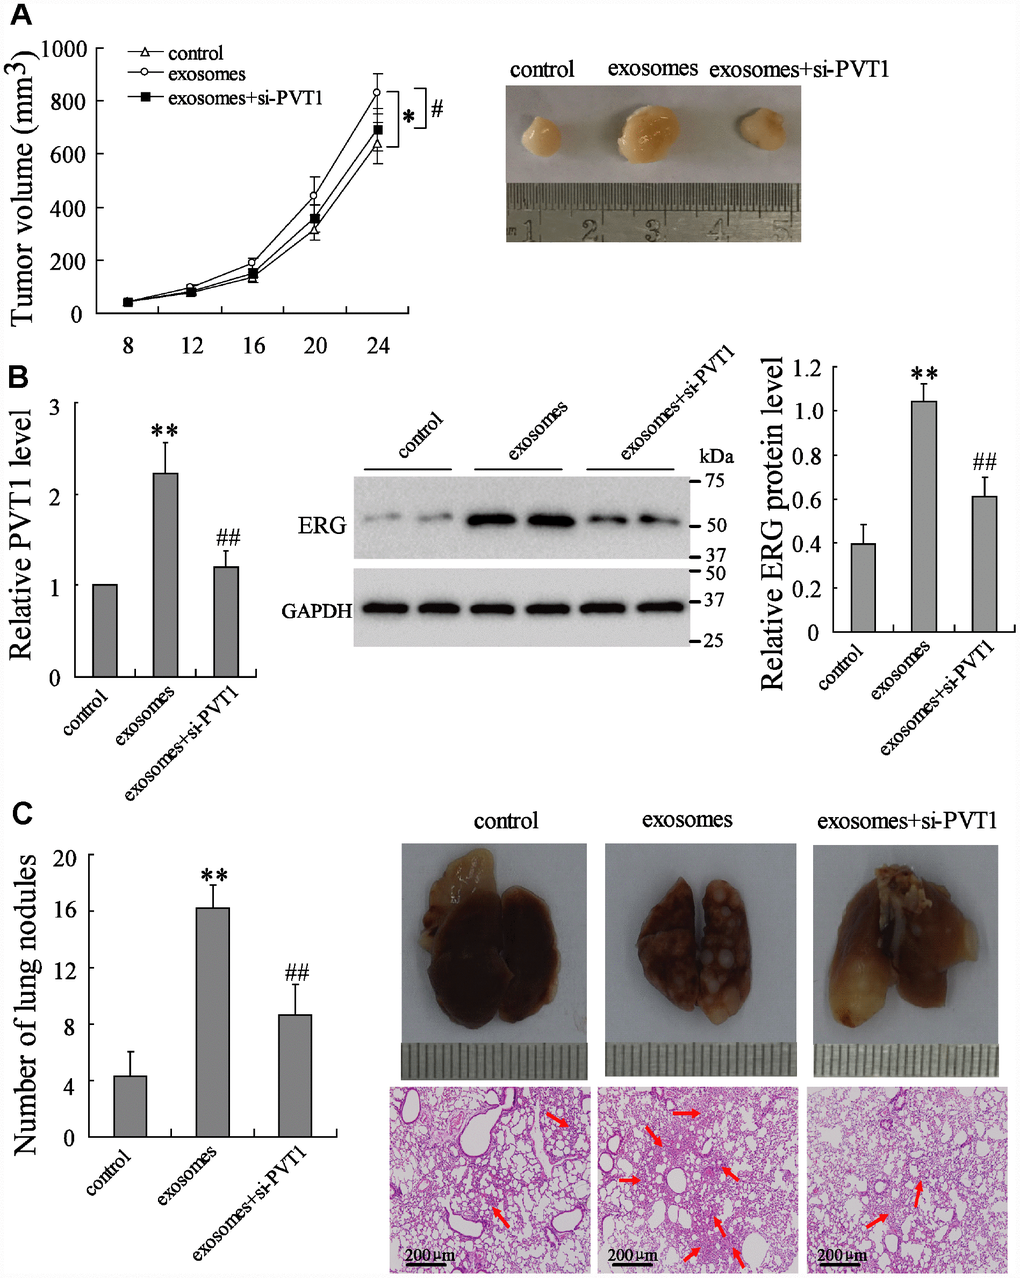 PVT1 in BMSC-EXO promotes osteosarcoma growth and metastasis via increasing ERG in vivo. The mouse xenograft (n=18) was established by subcutaneous inoculation of MNNG/HOS cells, and the pulmonary metastatic model (n=18) was established by tail vein injection of MNNG/HOS cells. Eight days after the establishment of xenograft and 3 weeks after the establishment of metastatic model, mice were divided into 3 groups, the control group (with PBS injection in tail vein, n=6), the exosome group (with 10 μg of BMSC-EXO injection in tail vein, n=6), and the exosomes+si-PVT1 group (with PVT1-interfering BMSC derived exosome injection in tail vein, n=6). (A) The tumor volume was detected every 4 days. (B) The expression of PVT1 and ERG in tumor tissues after 3 weeks. (C) The number and the H&E staining of lung metastatic nodules (red arrows). *p